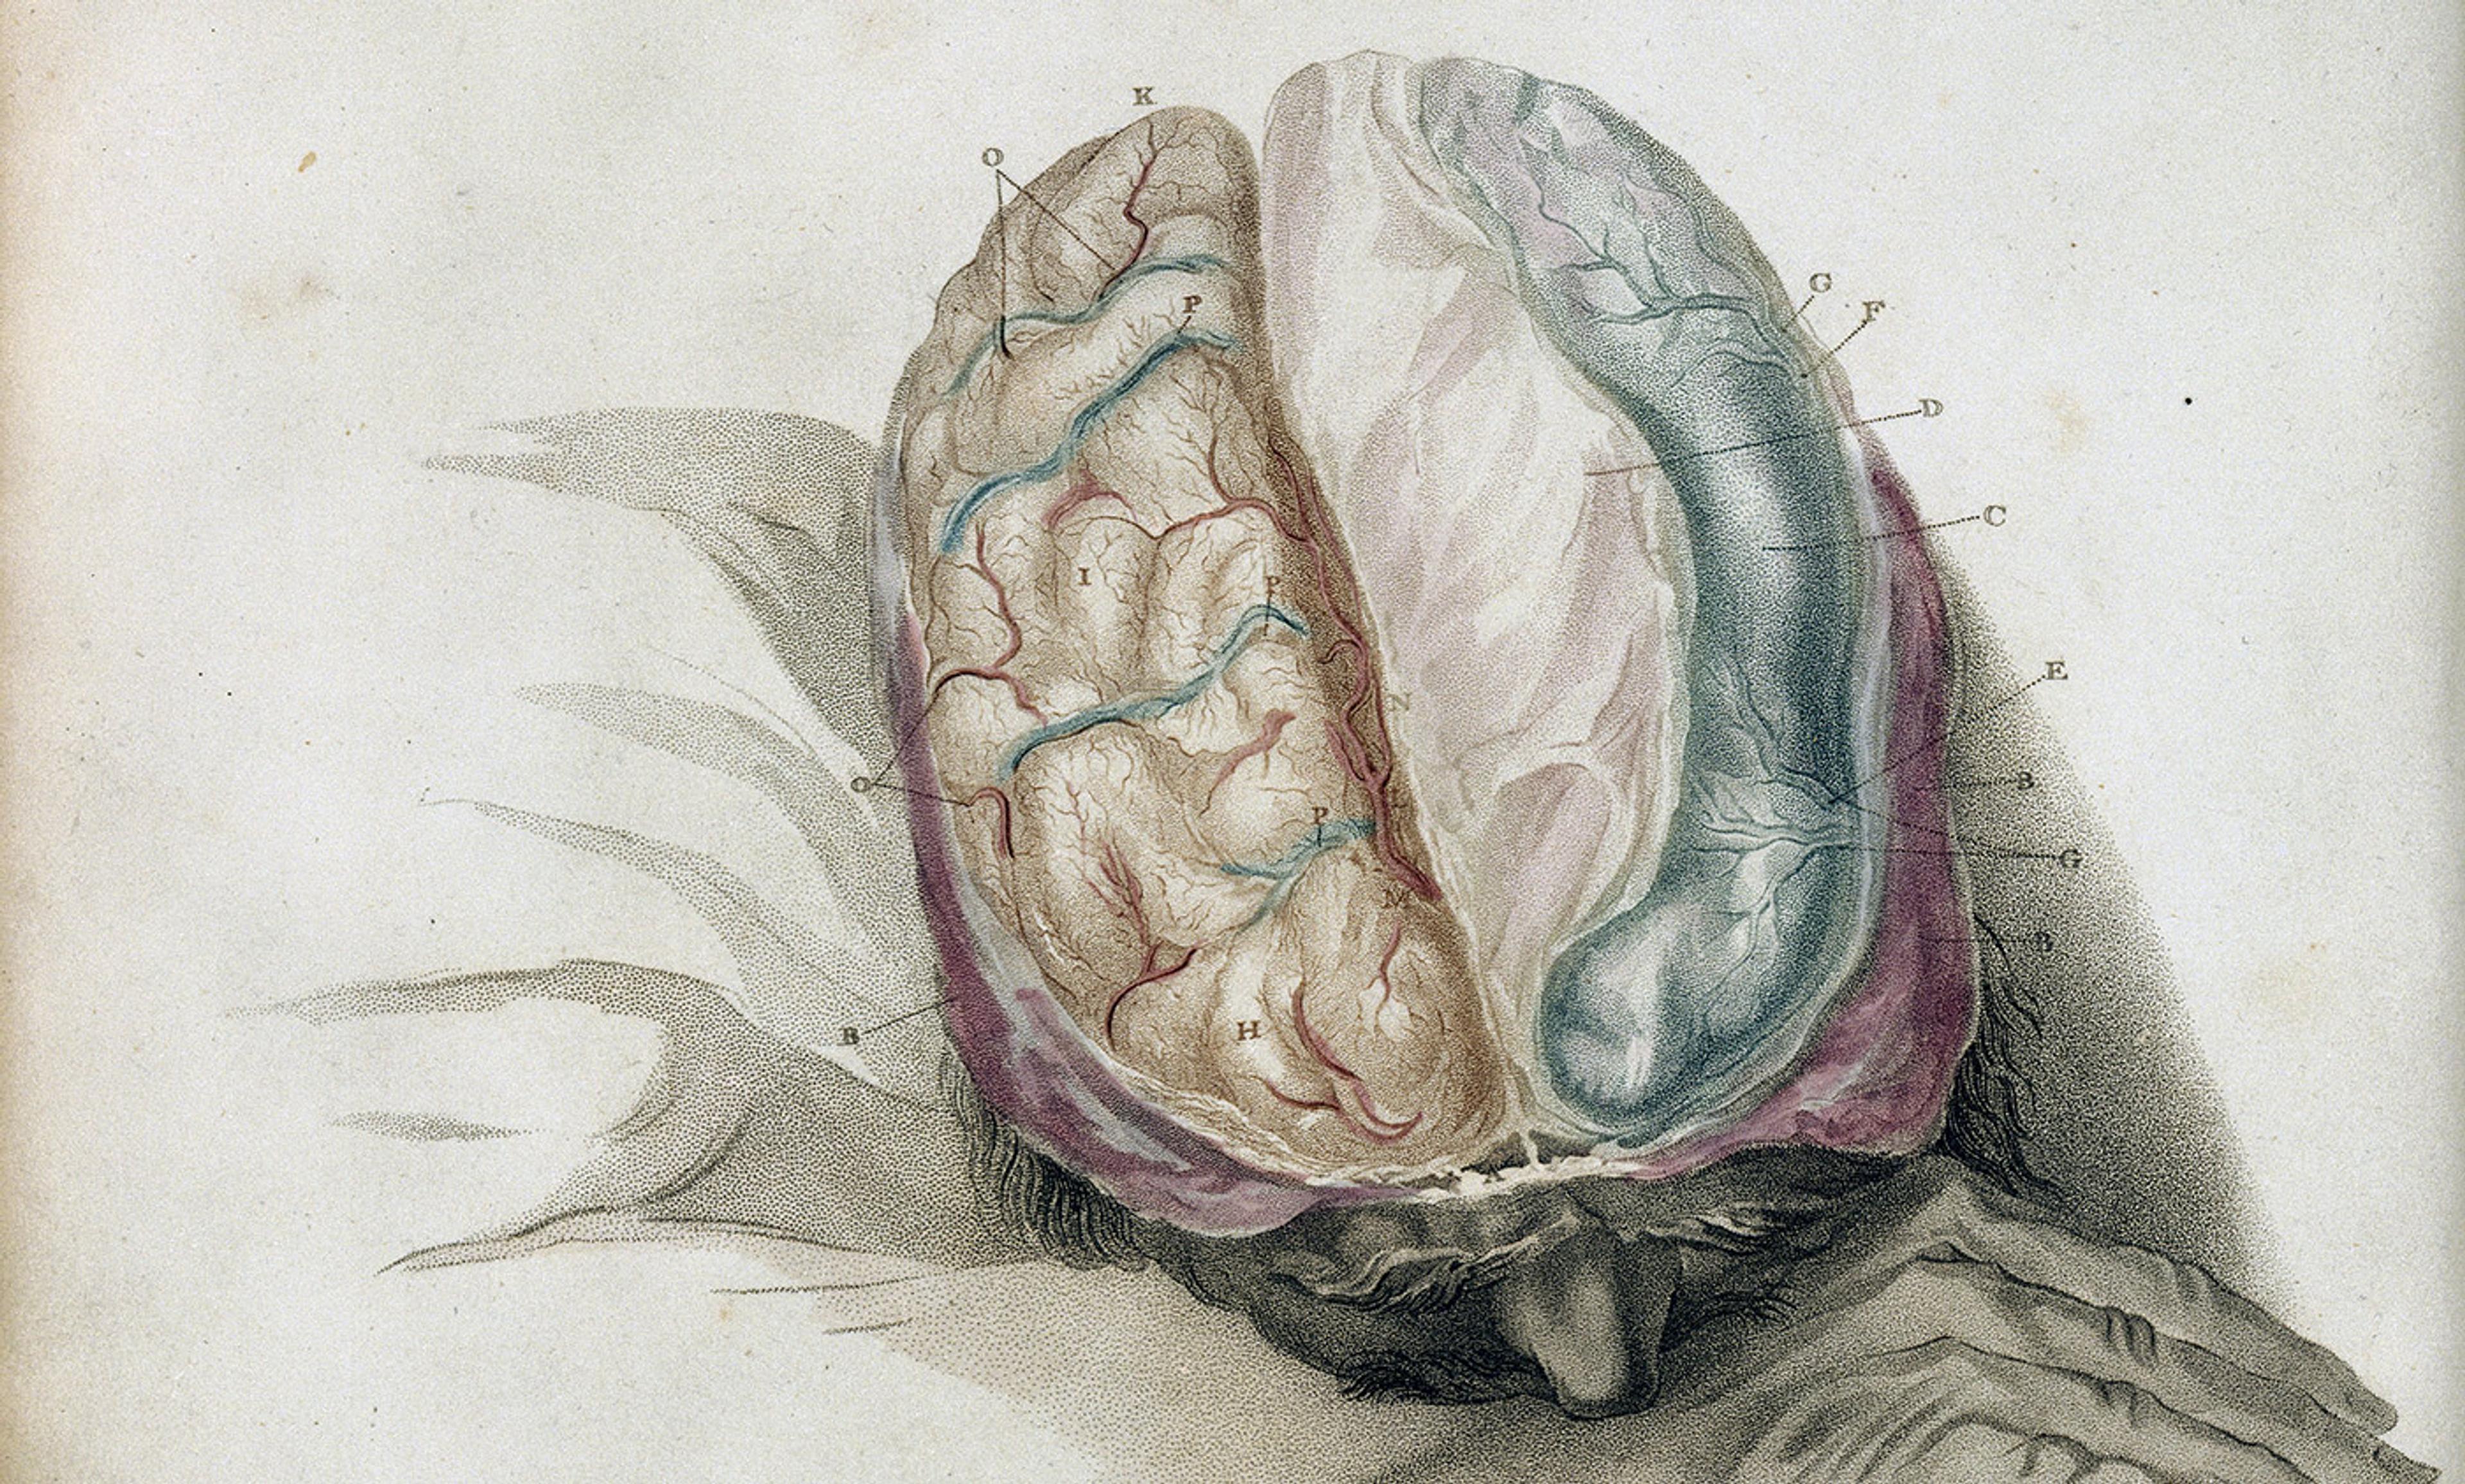 <p>Charles Bell <em>The Anatomy of the Brain</em>. Courtesy Wellcome Images</p>